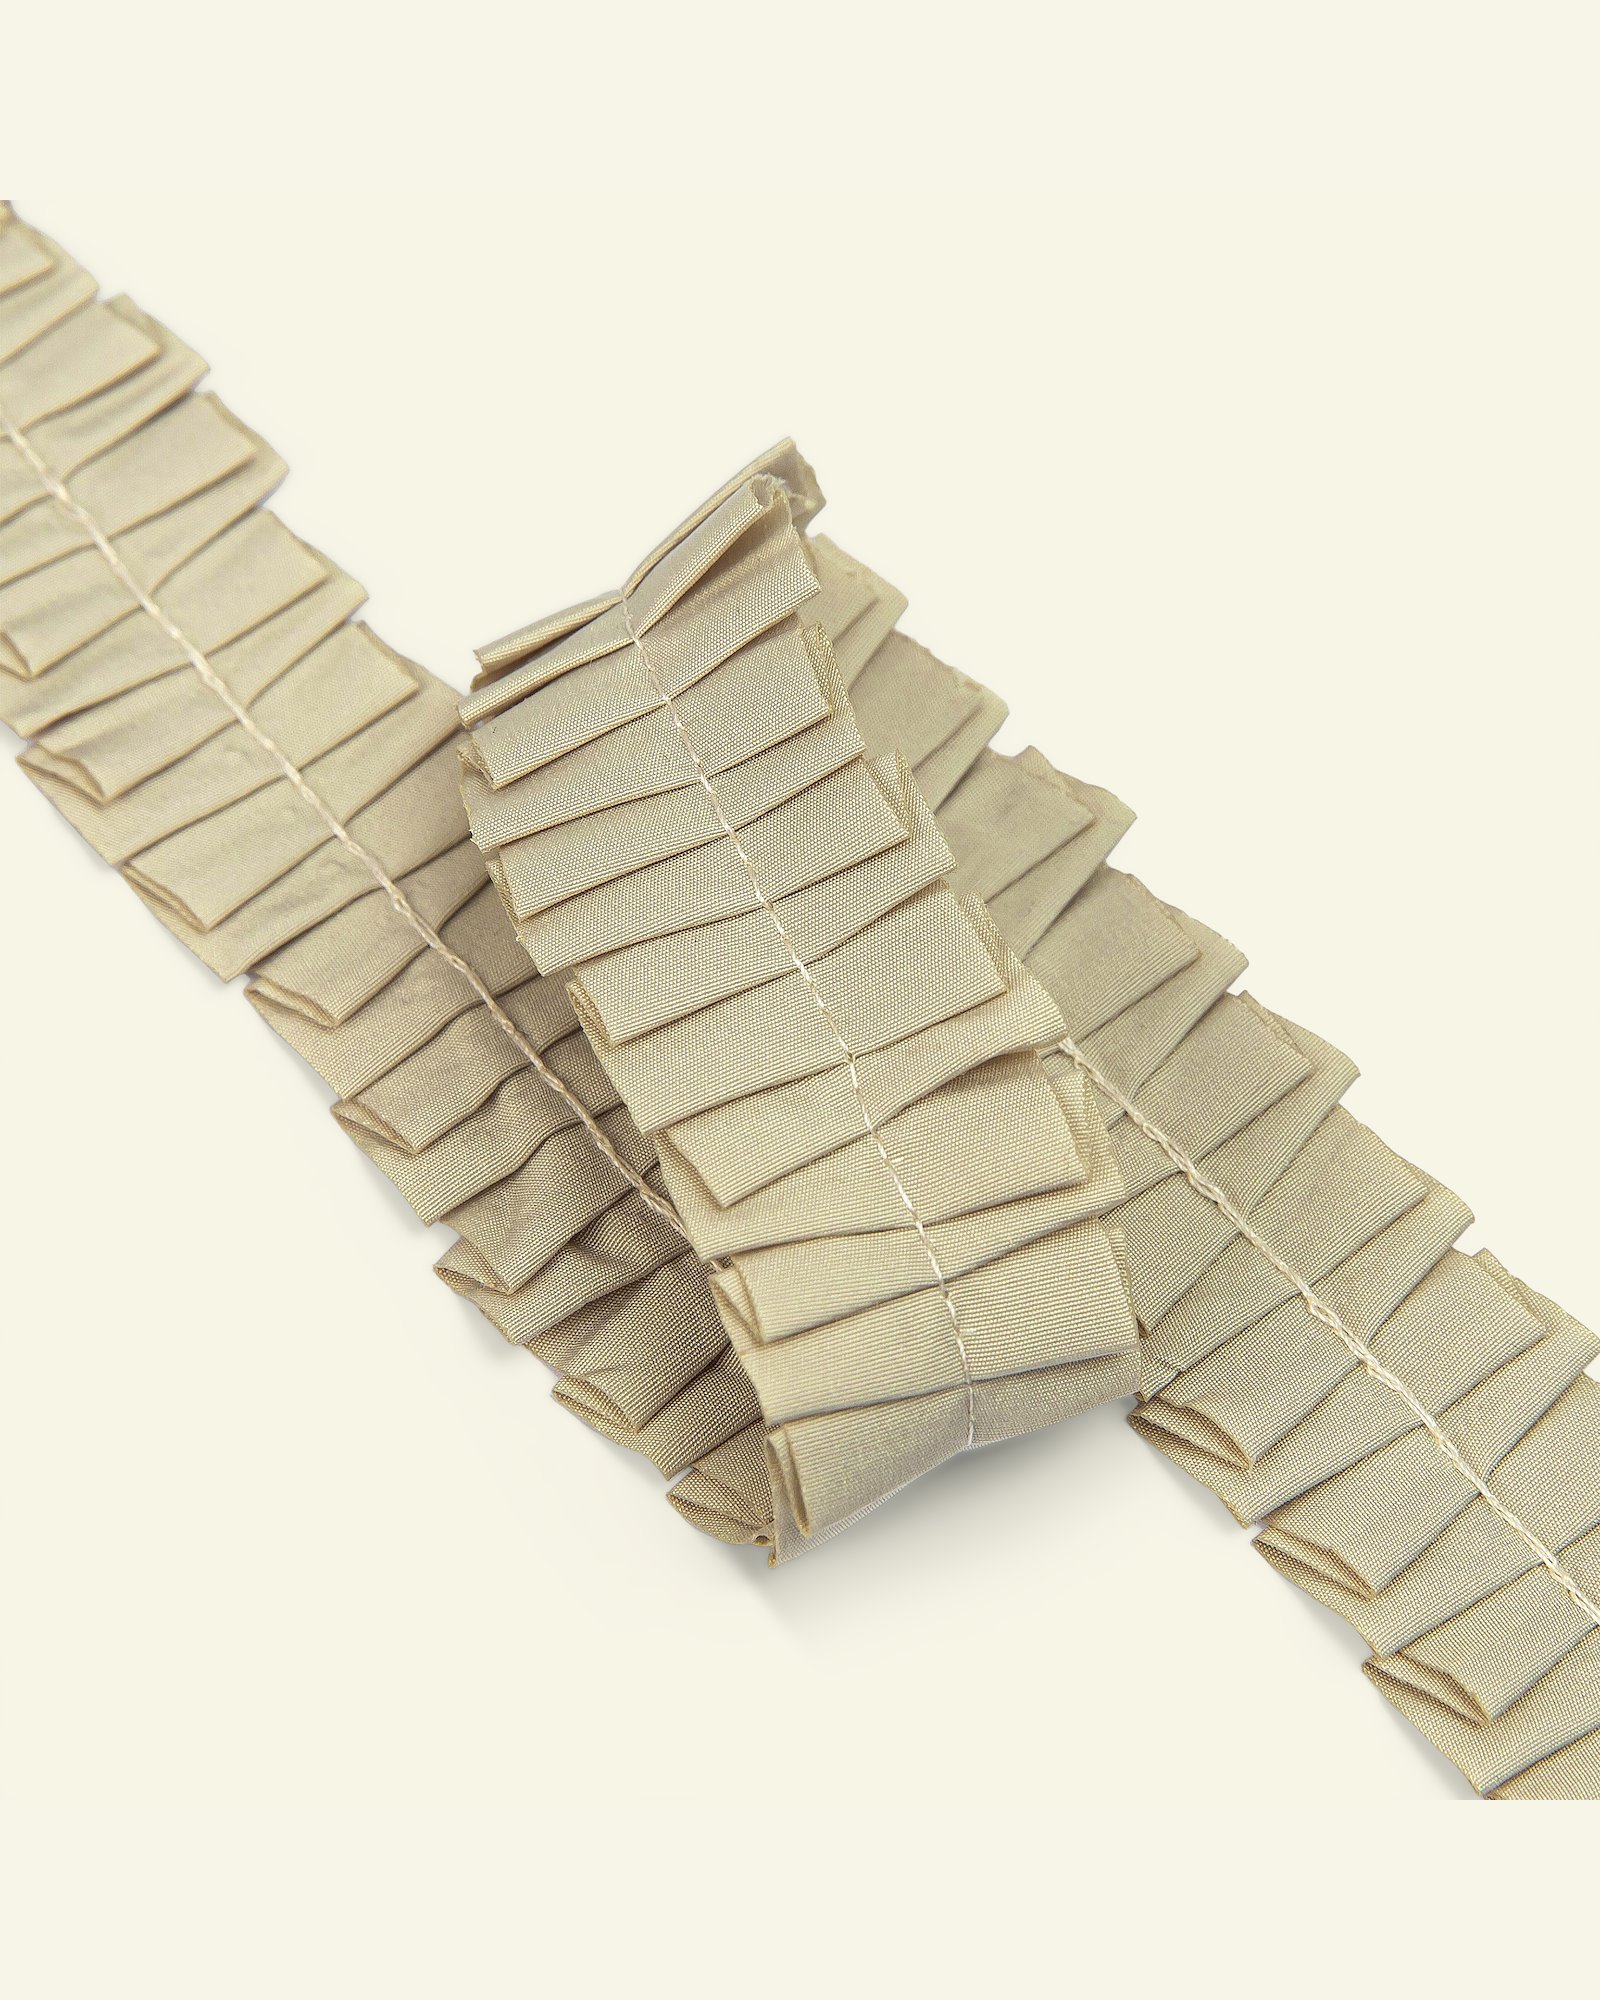 Band volang 25mm beige 2m 21482_pack